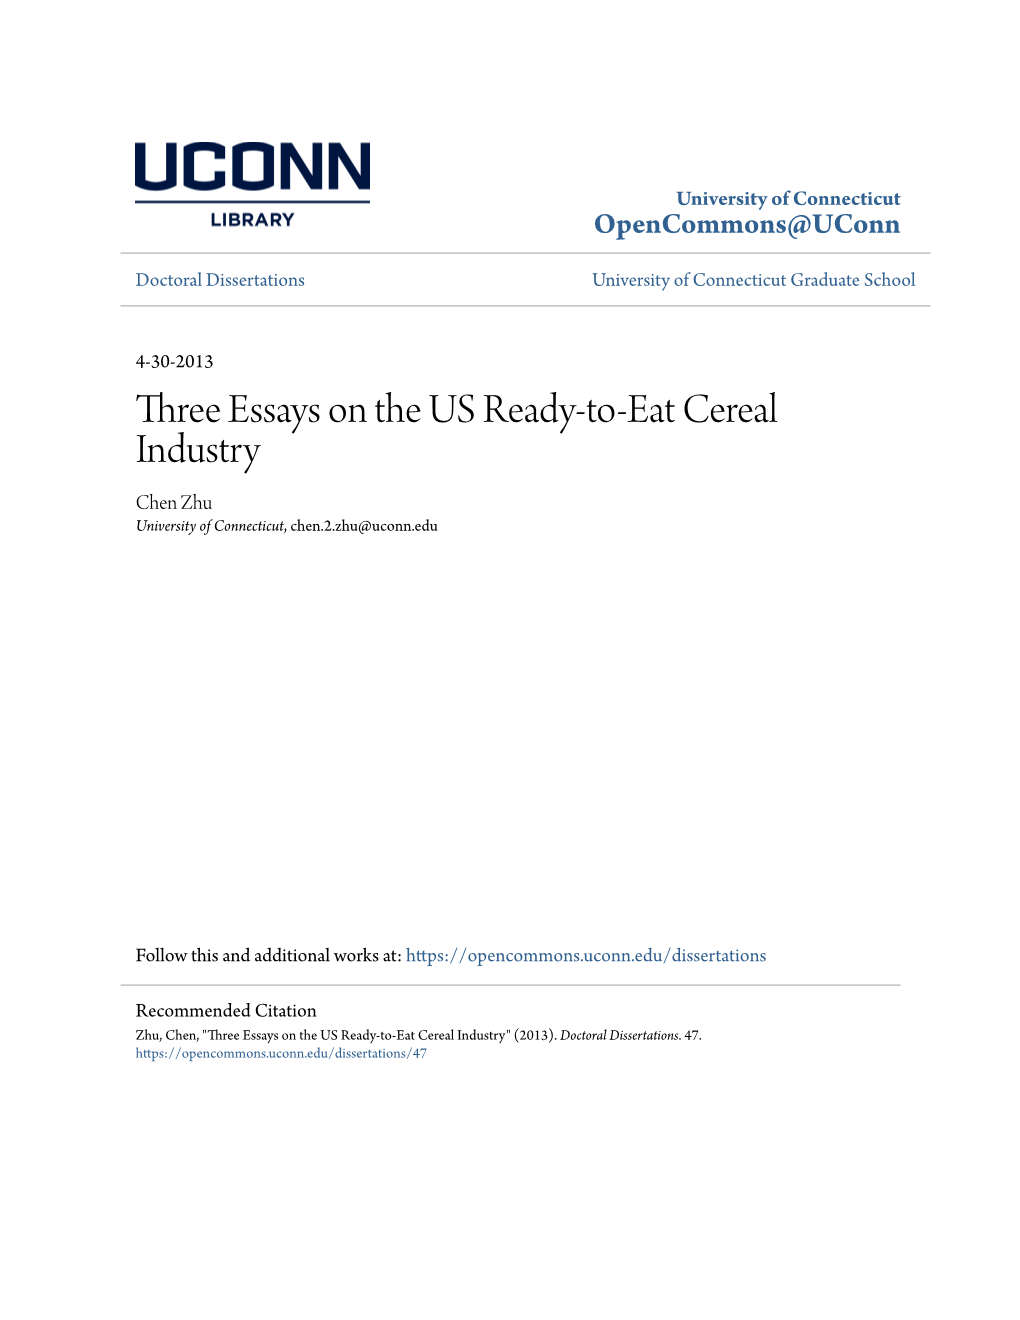 Three Essays on the US Ready-To-Eat Cereal Industry Chen Zhu University of Connecticut, Chen.2.Zhu@Uconn.Edu